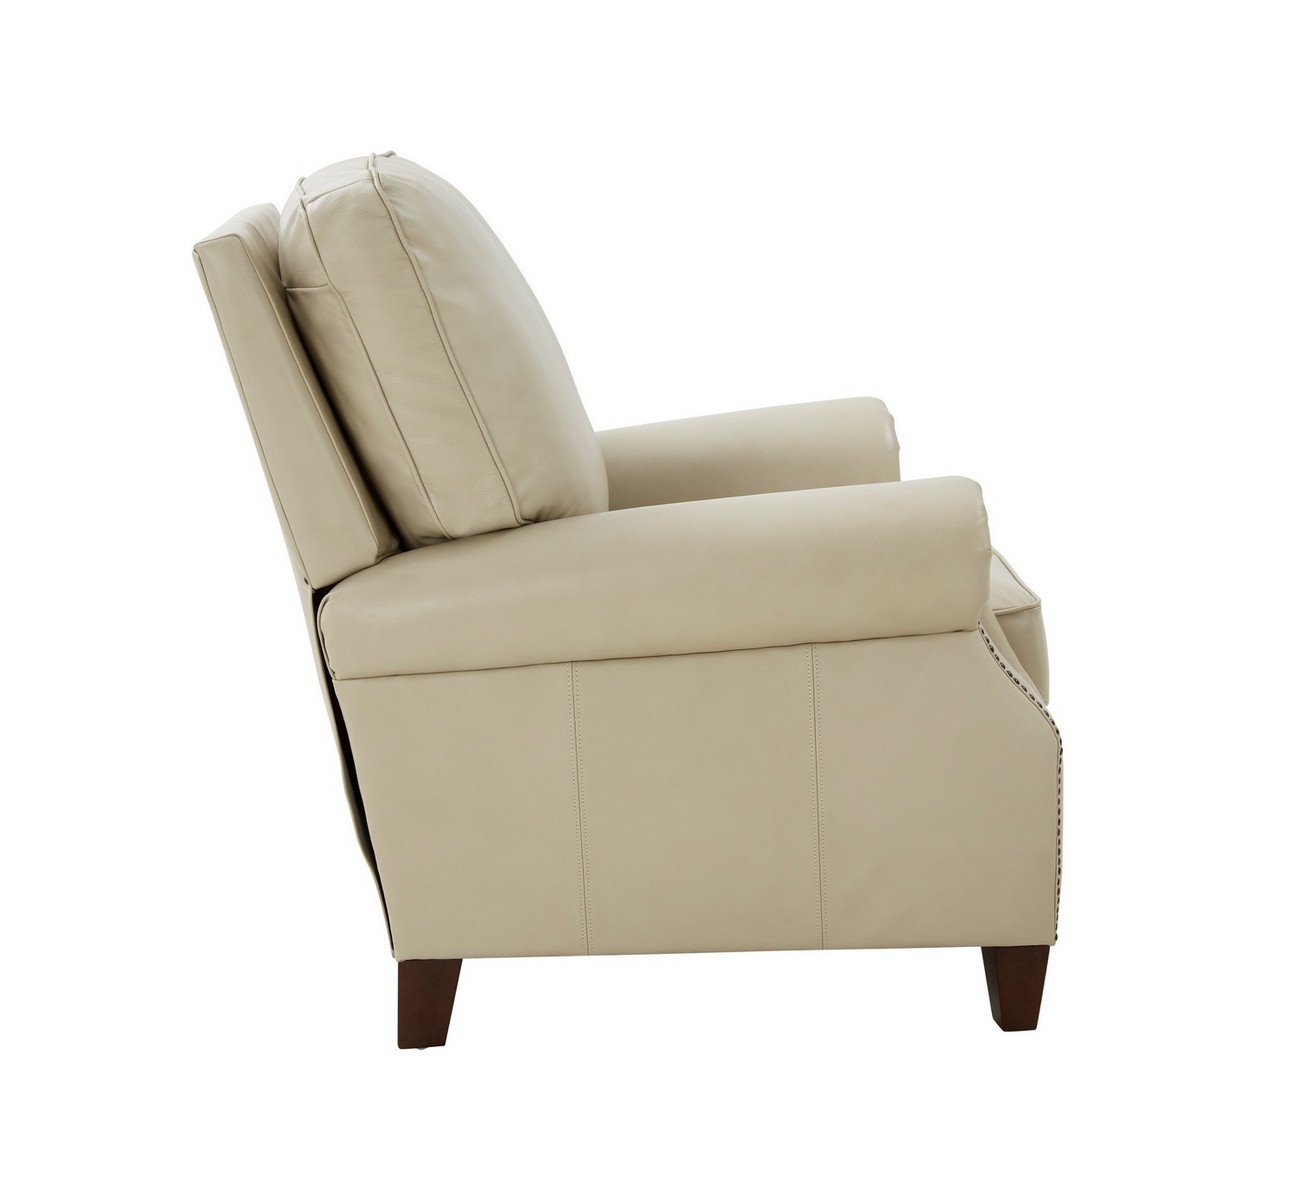 Barcalounger Briarwood Recliner Chair - Barone Parchment/All Leather